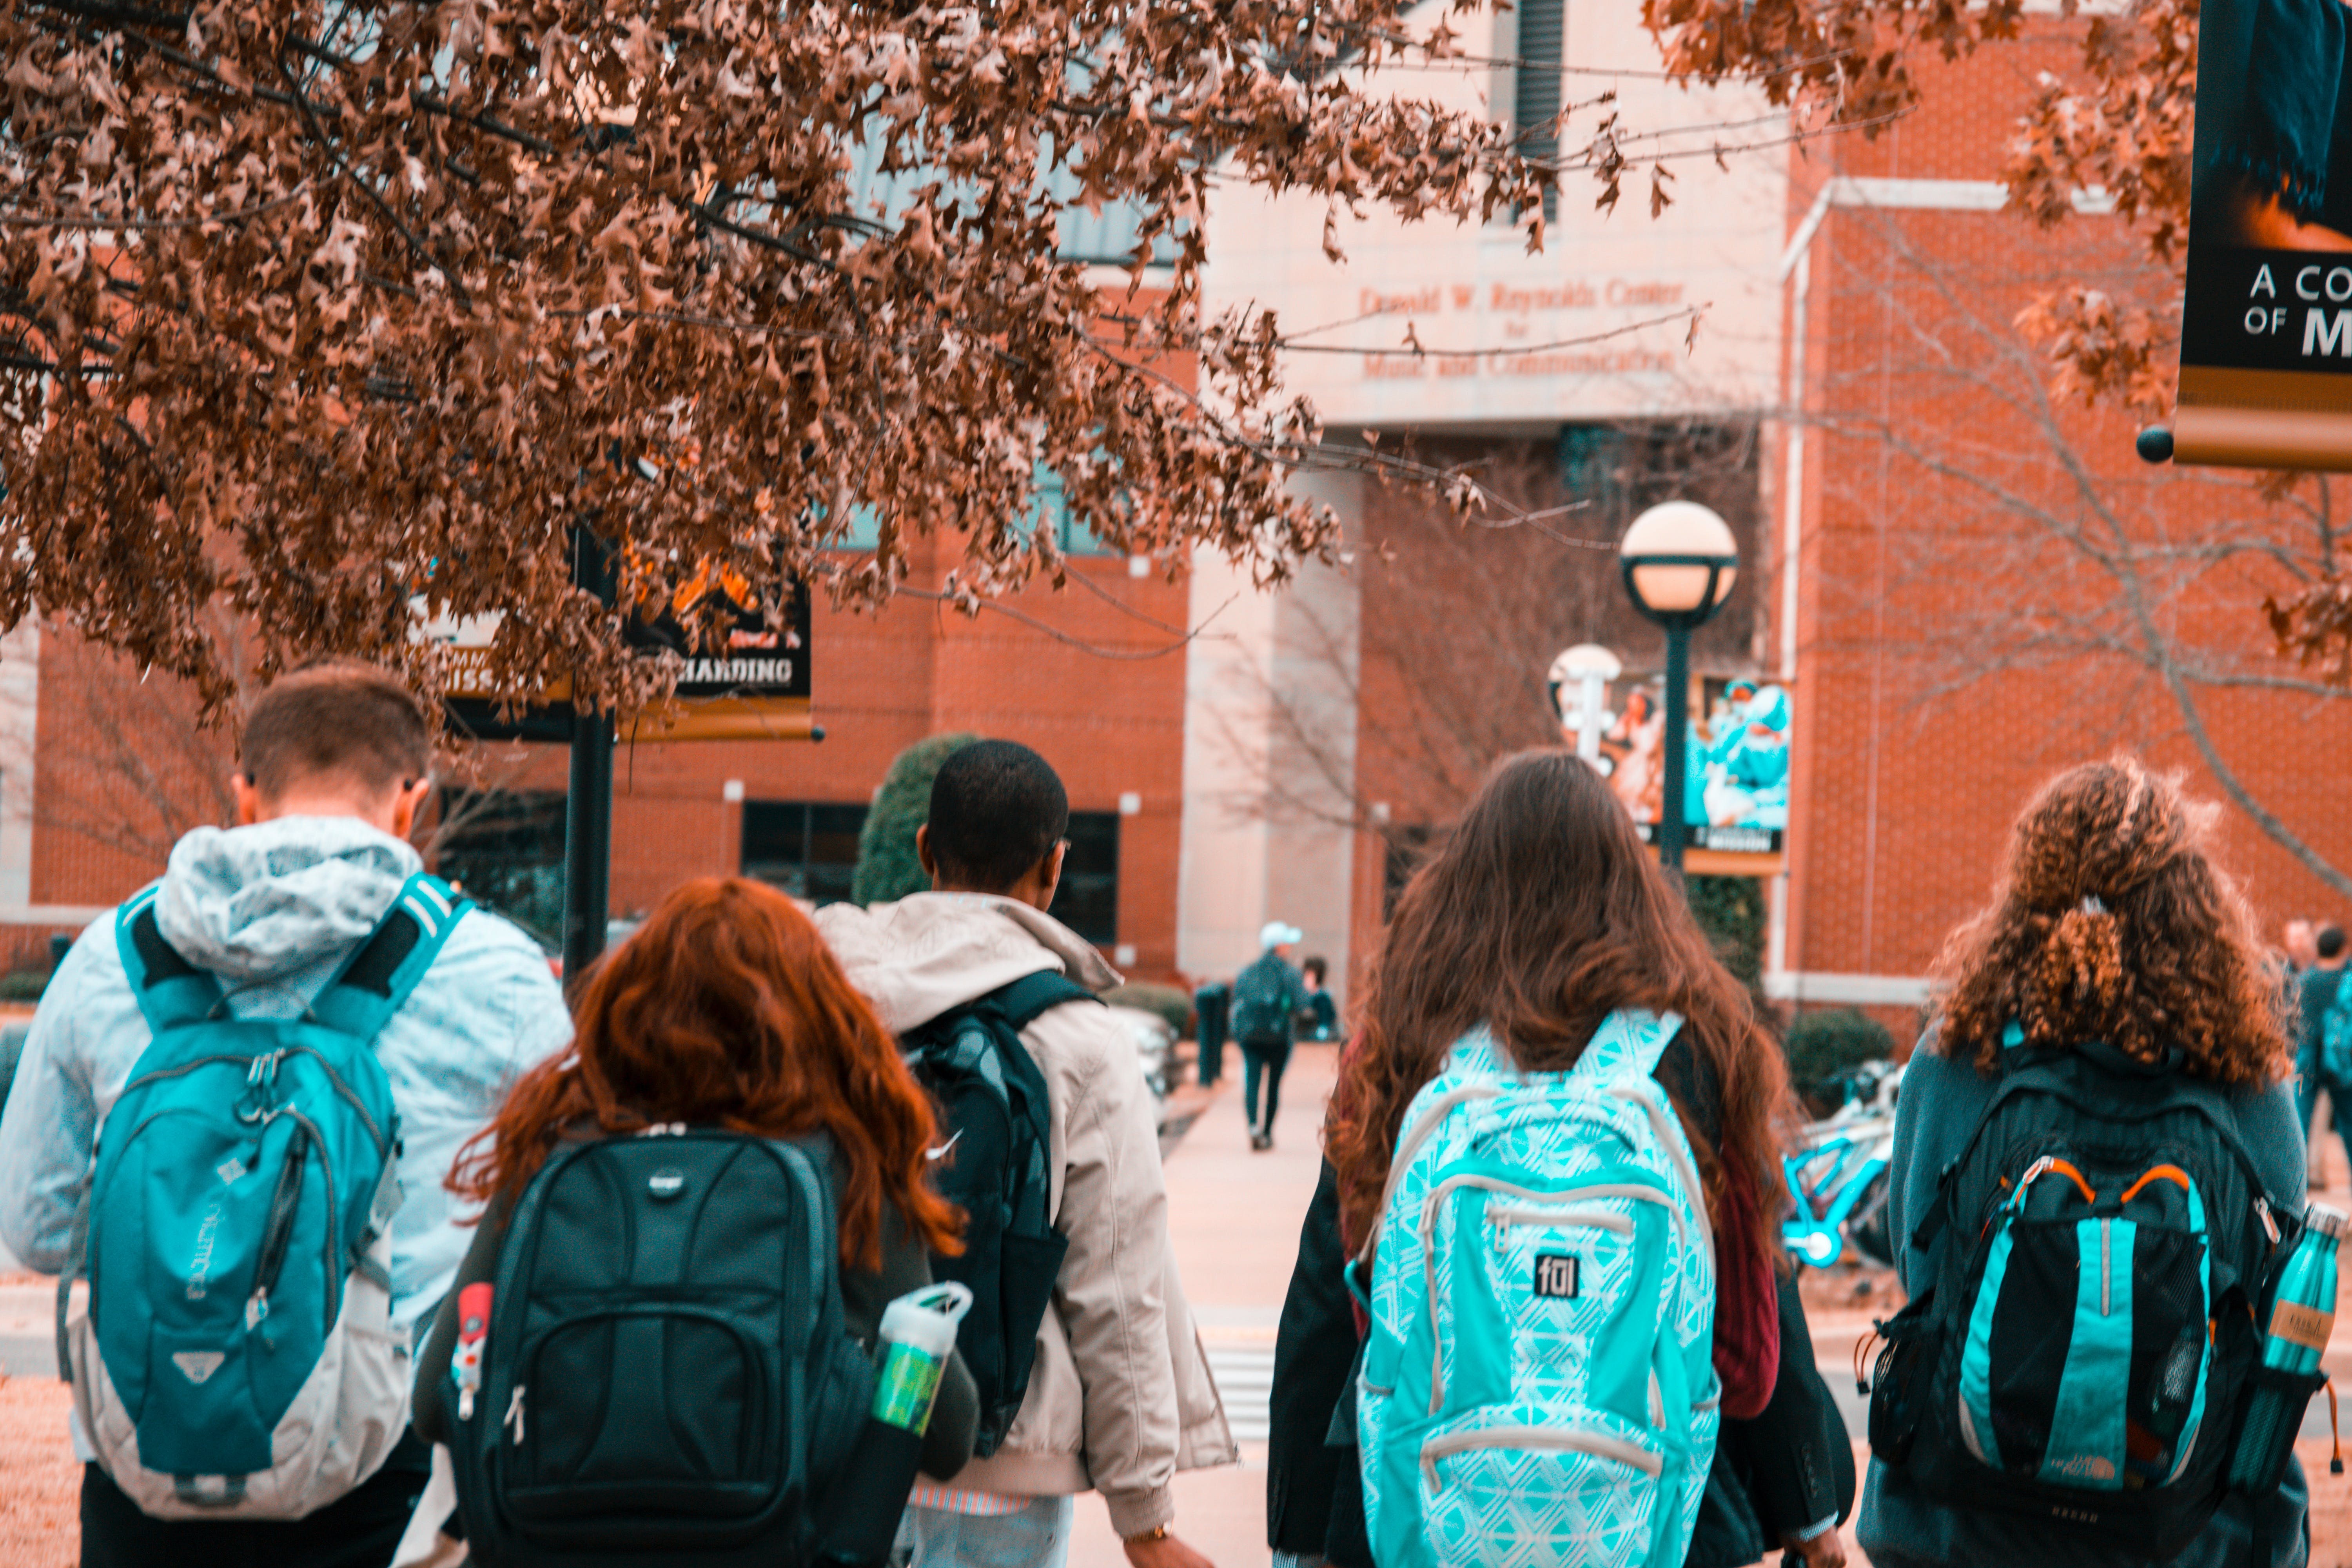 Students wearing backpacks while walking into a school | Source: Pexels